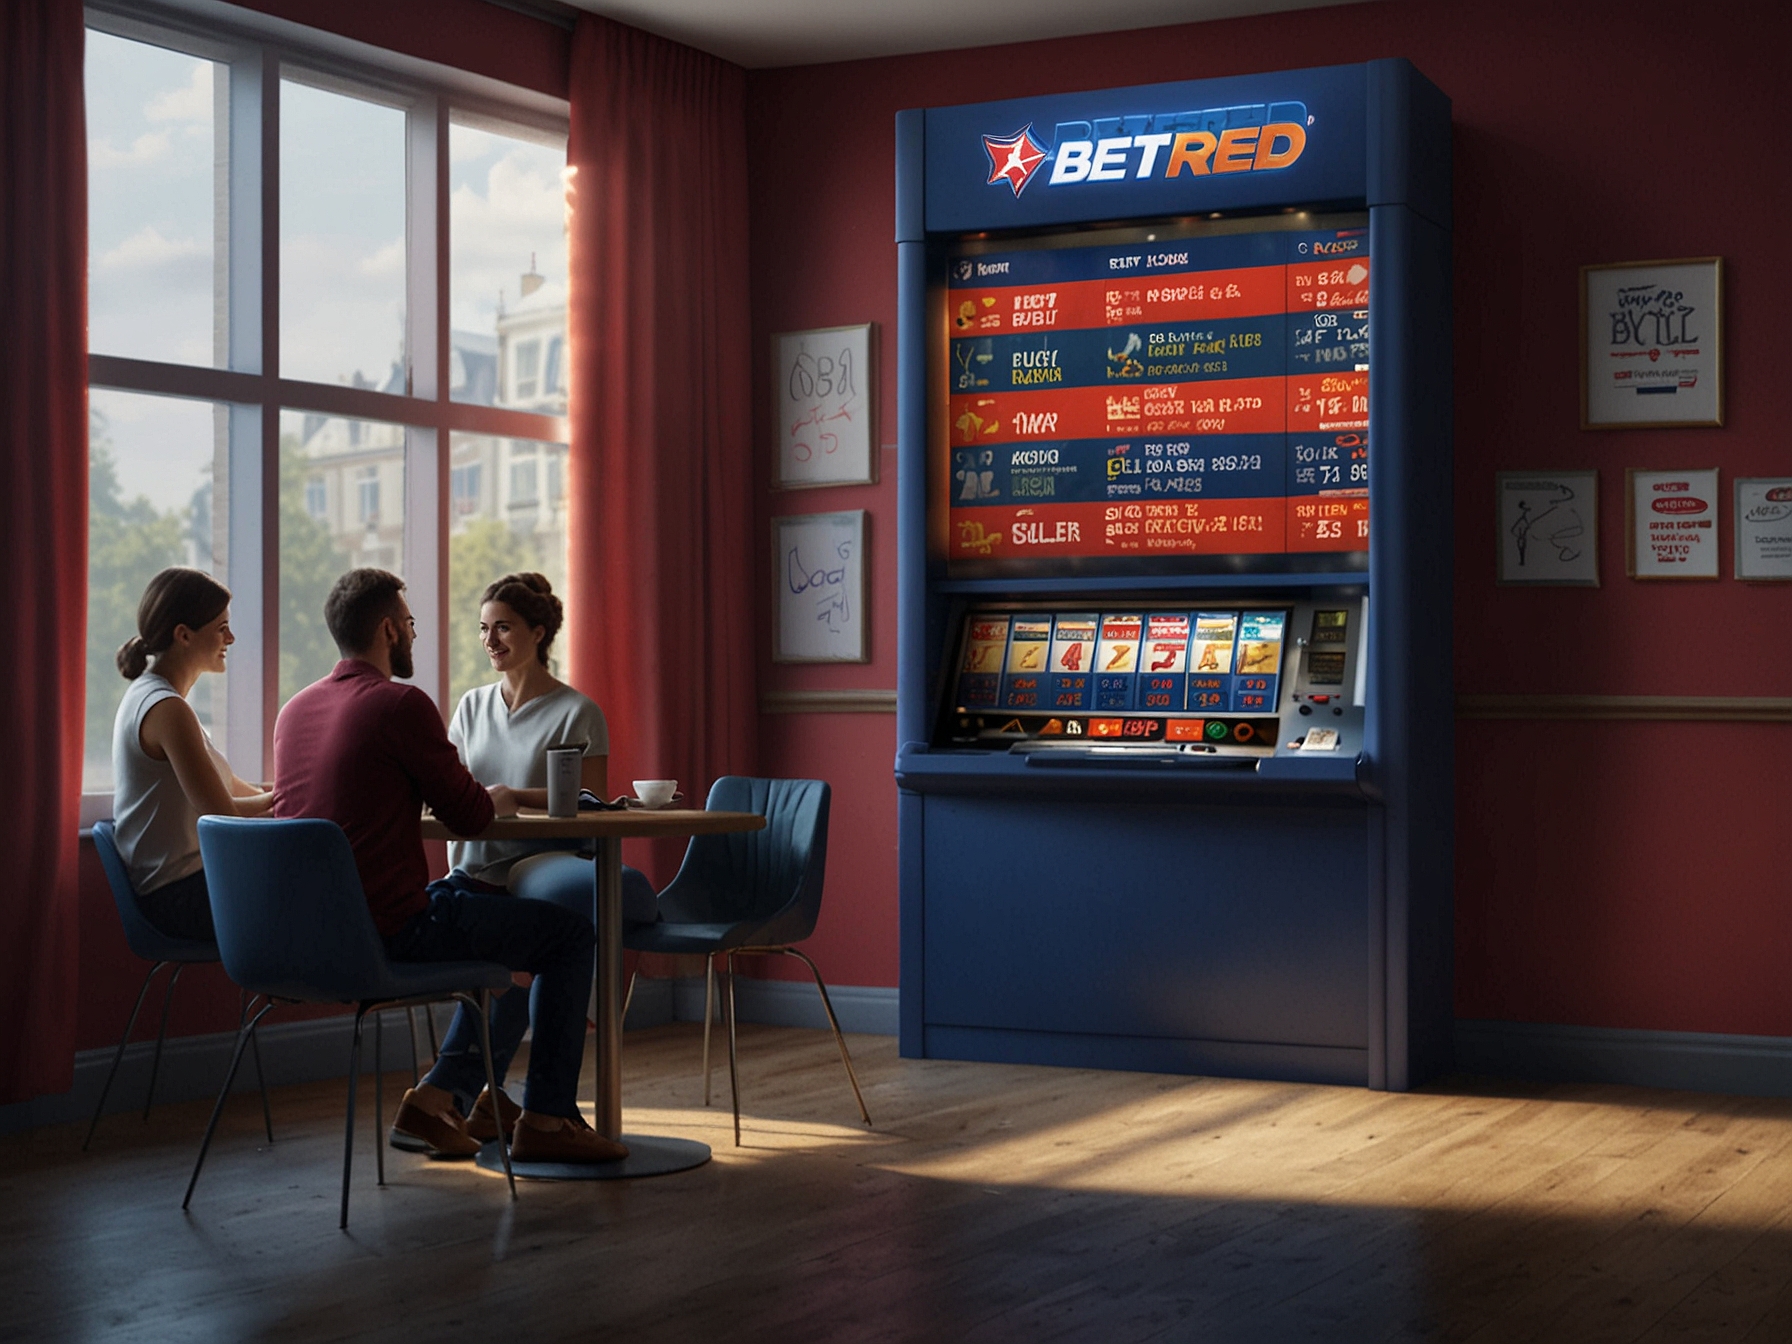 A graphic highlighting Betfred's 8/1 #PickYourPunt and the £50 welcome bonus, depicting a step-by-step guide for new customers to sign up, make a deposit, and place qualifying bets to claim the offer.